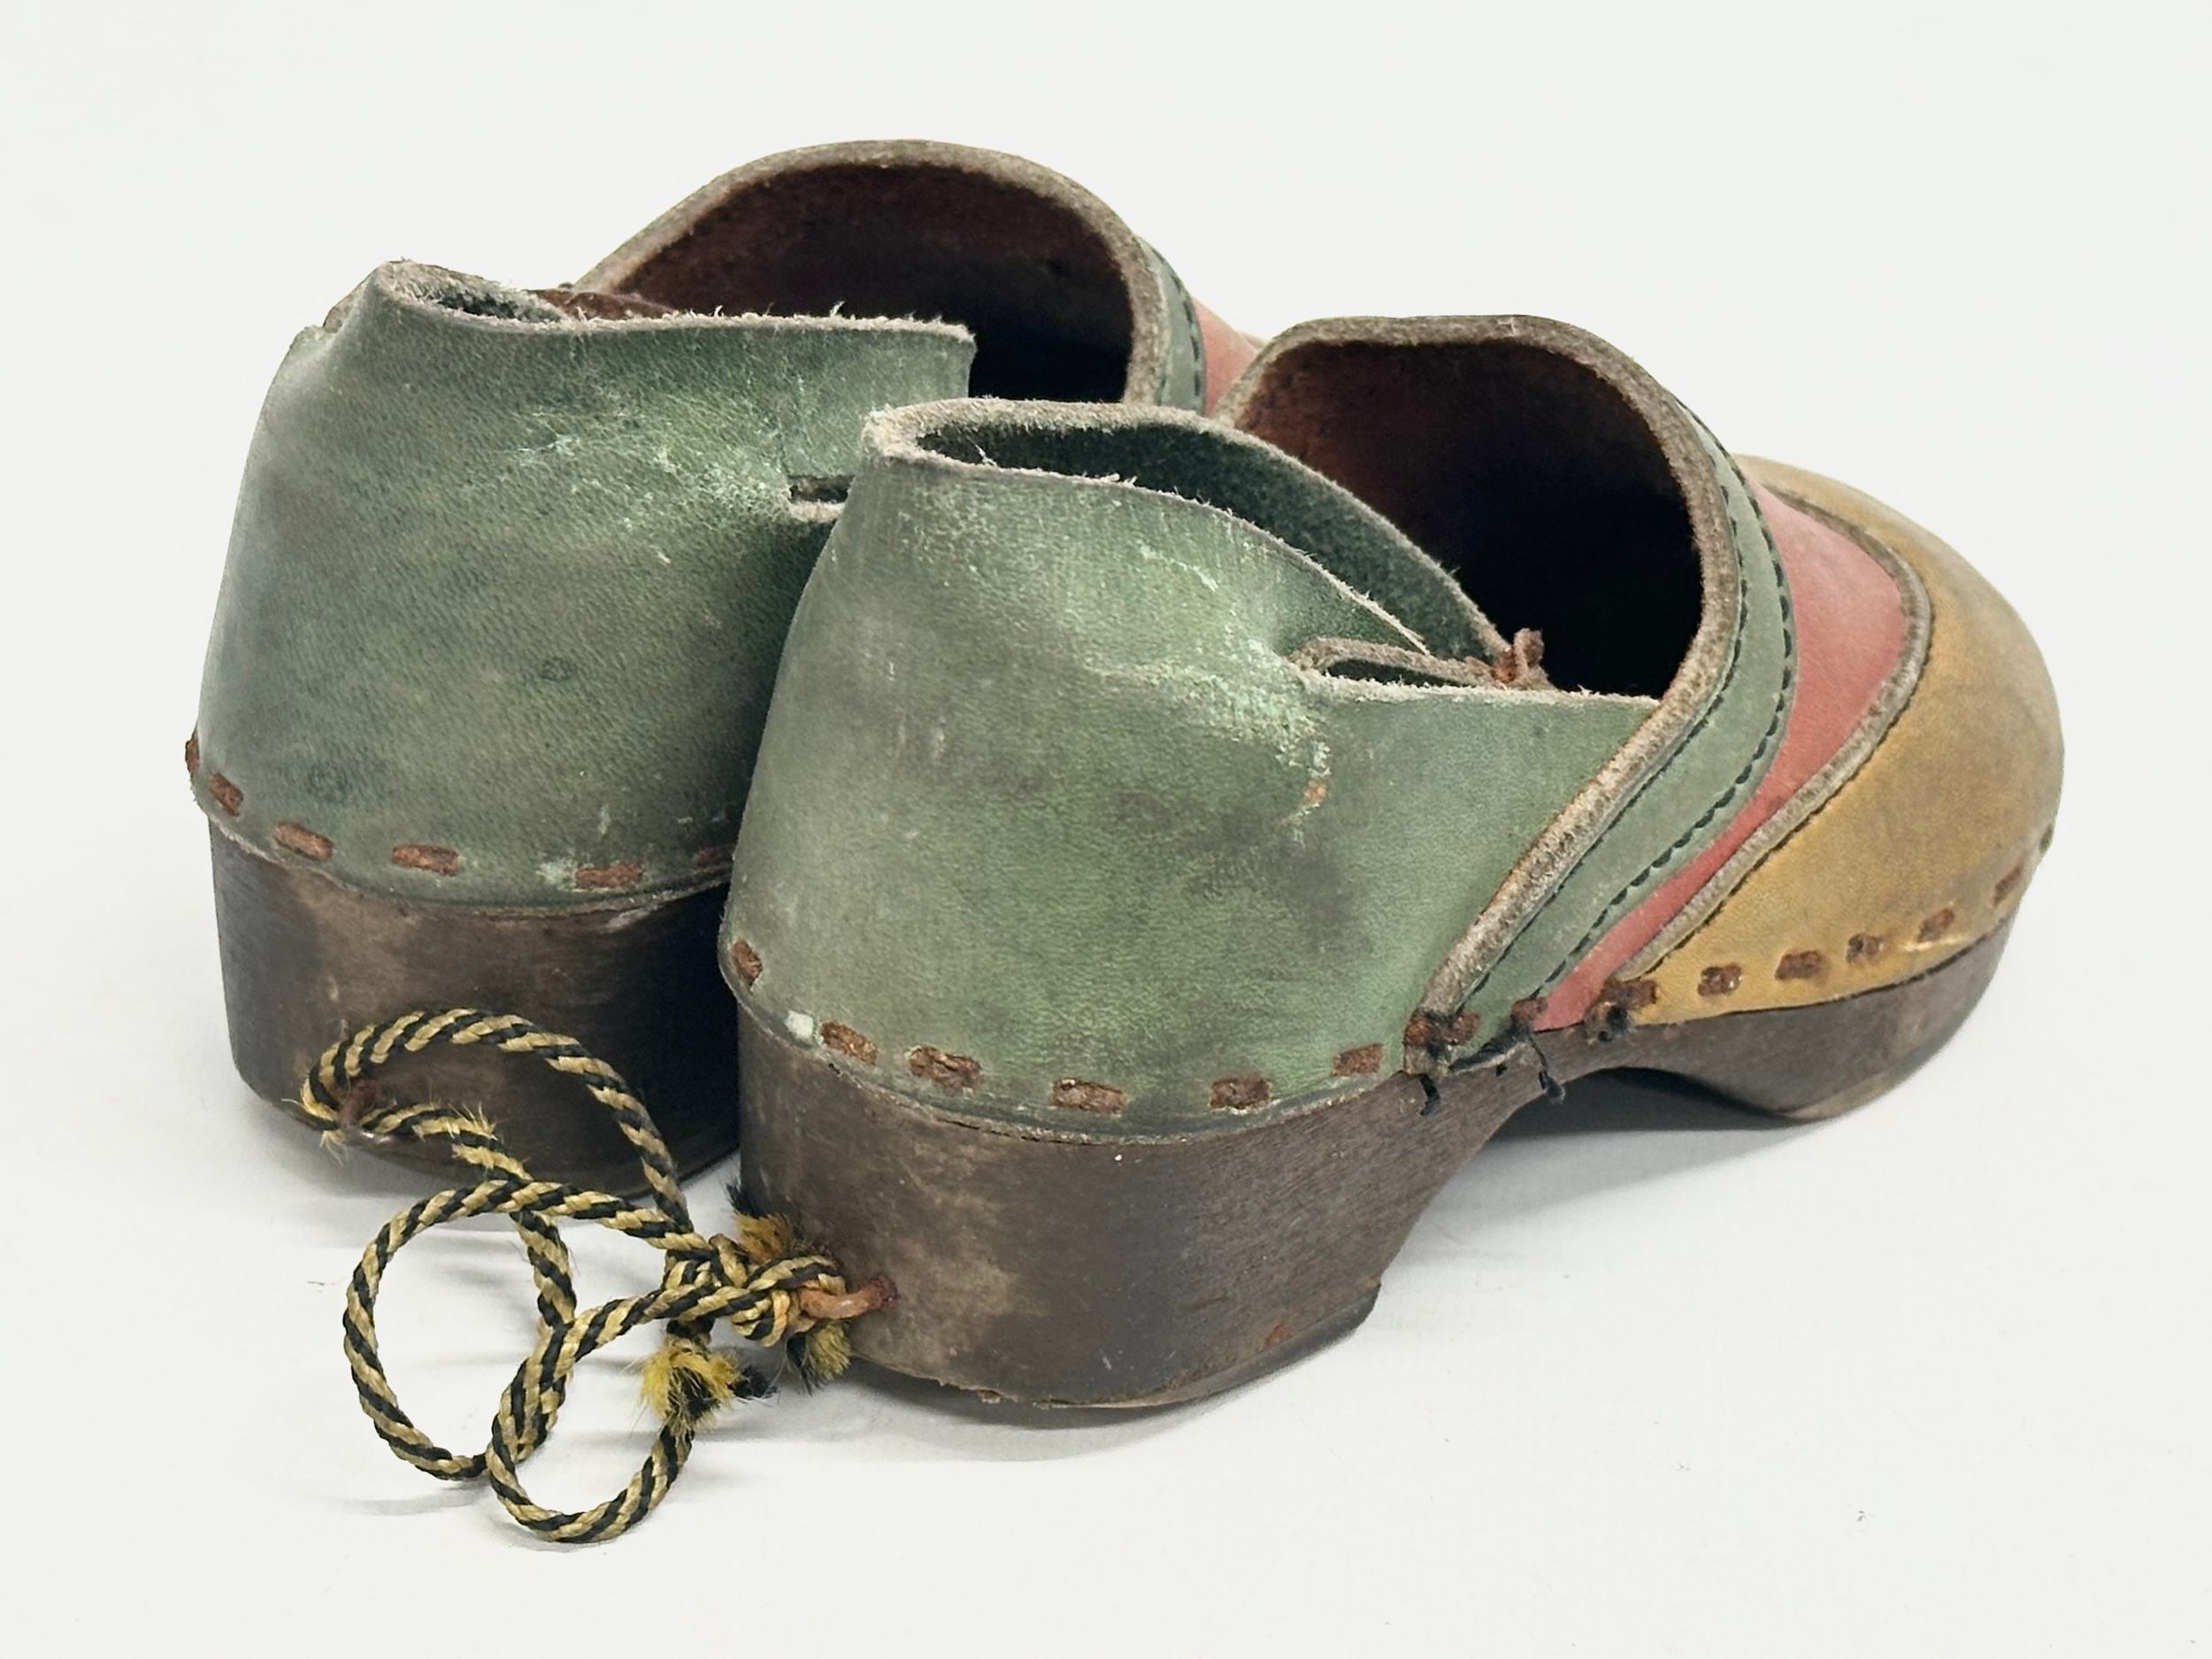 A pair of vintage child’s Folk Art leather and wooden clogs. - Image 3 of 4